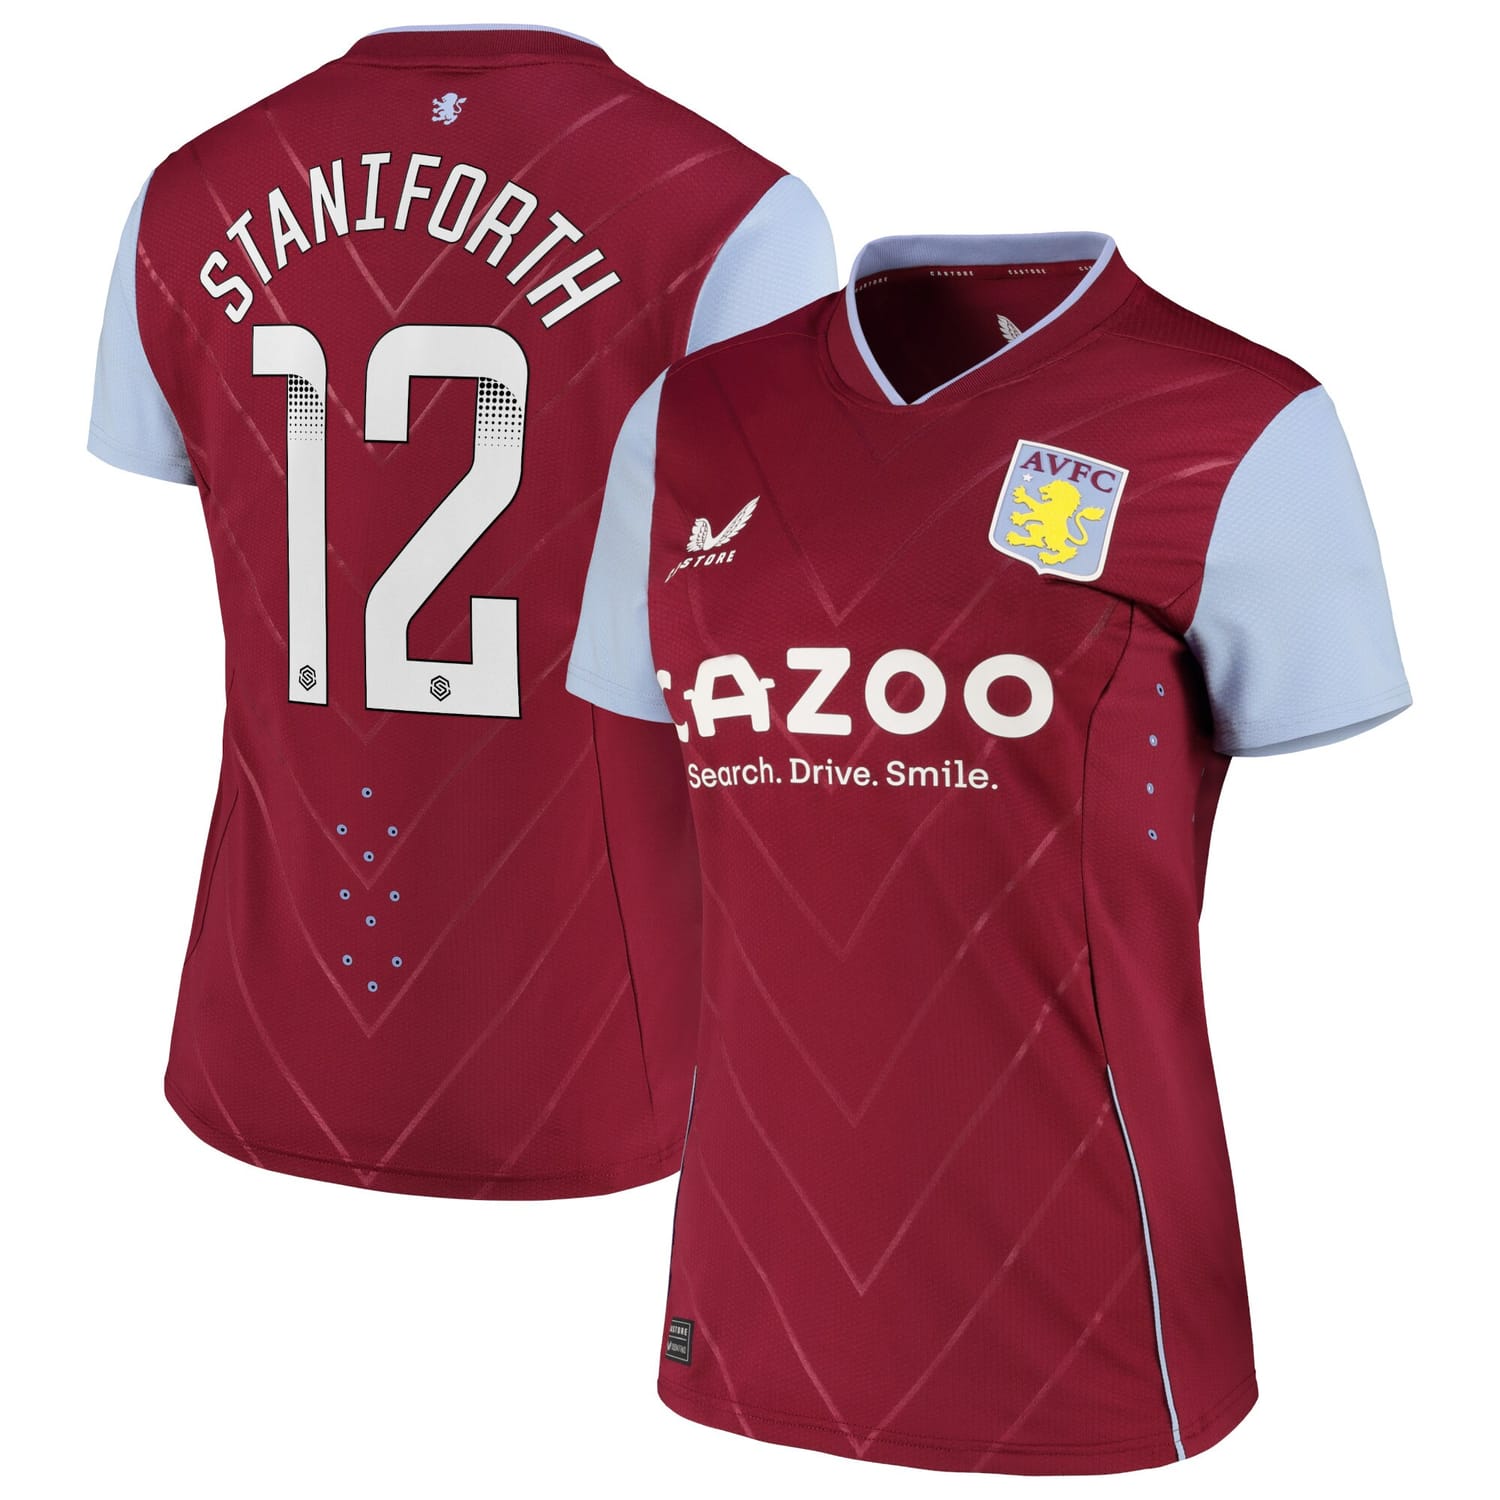 Premier League Aston Villa Home WSL Pro Jersey Shirt 2022-23 player Lucy Staniforth 12 printing for Women